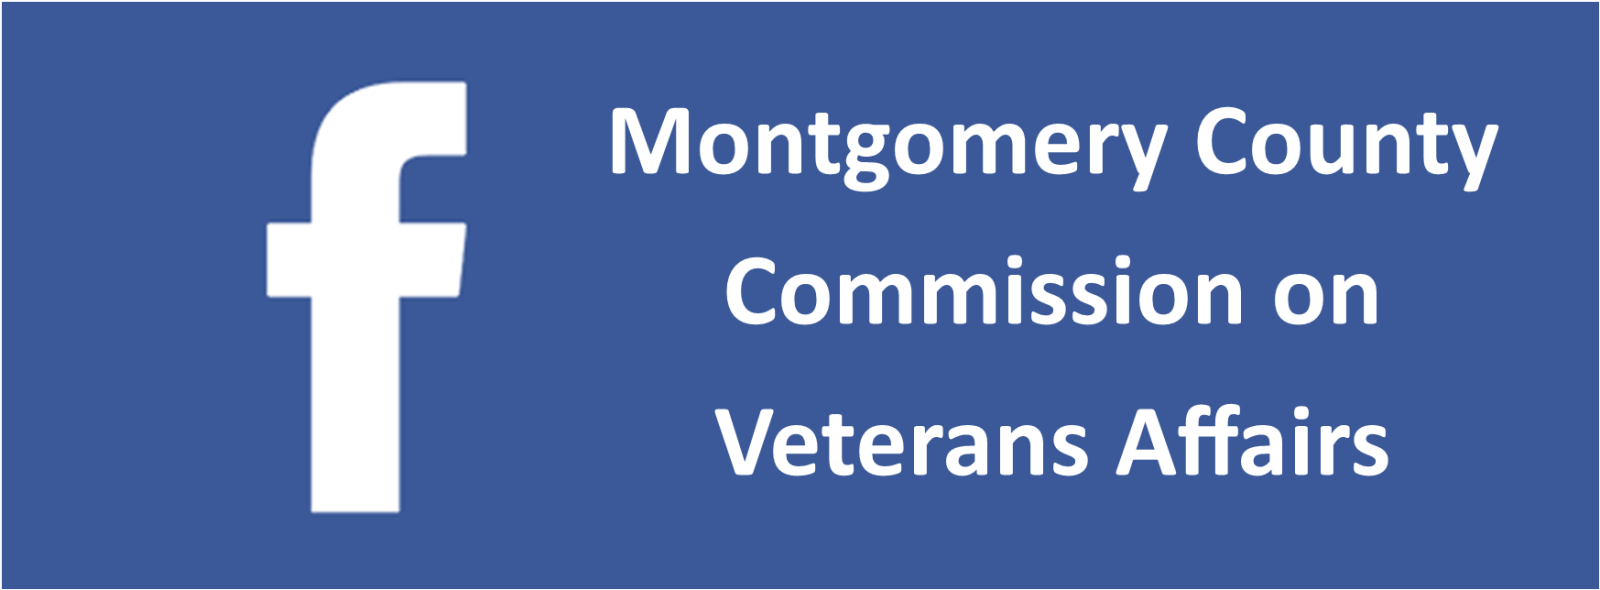 Montgomery County Commission on Veterans Affairs Facebook